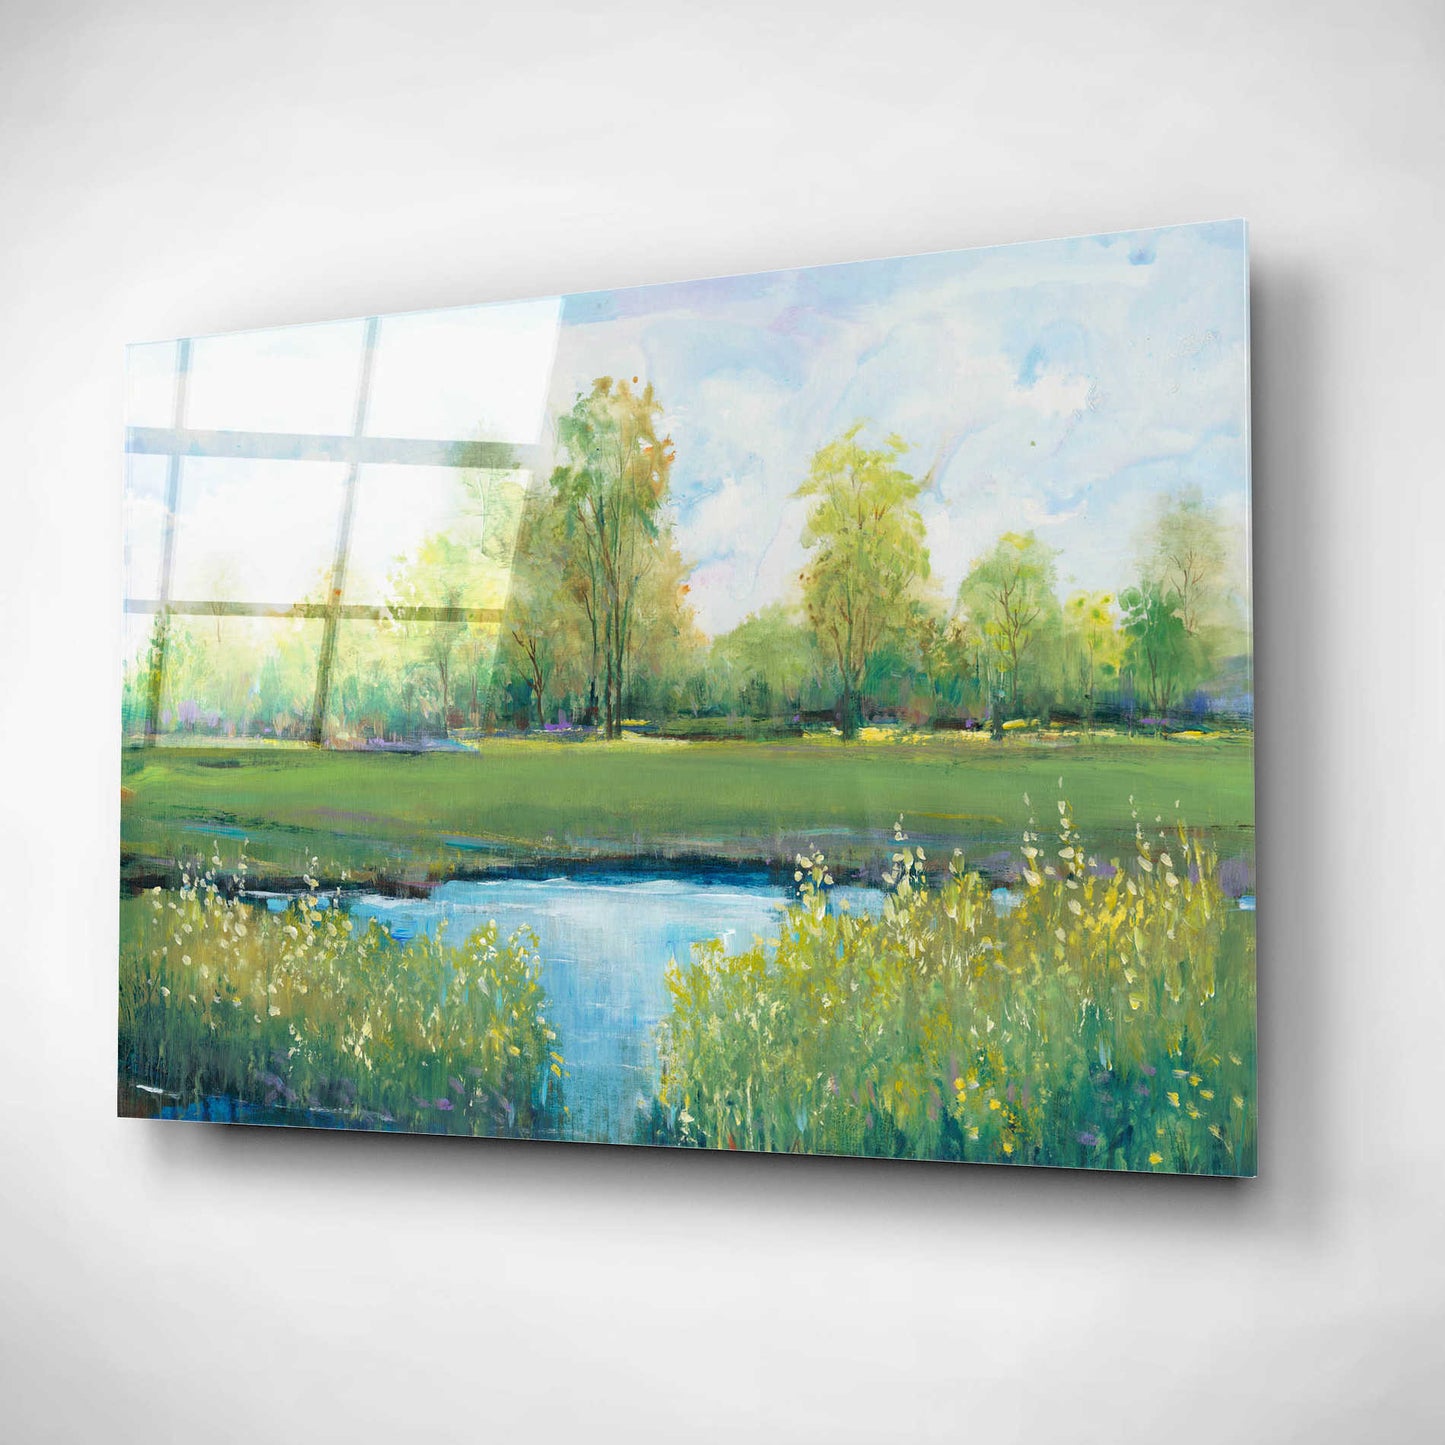 Epic Art 'Tranquil Park II' by Tim O'Toole, Acrylic Glass Wall Art,24x16